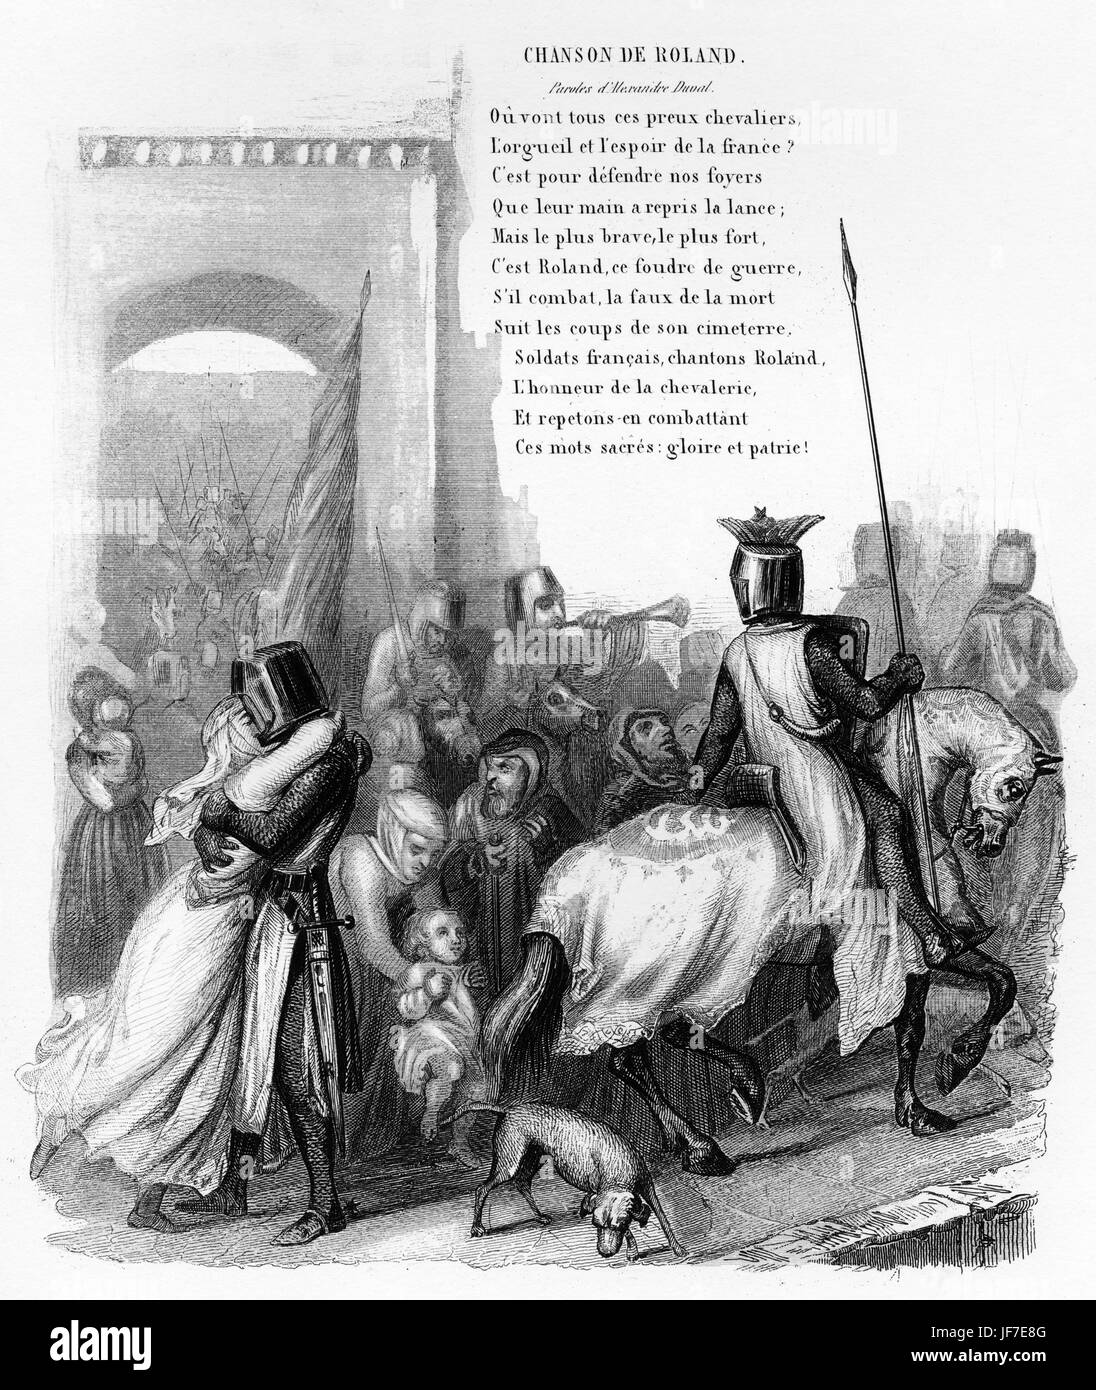 La chanson de Roland With part of the lyrics by Alexandre Duval.  Knights saying farewell as they leave for battle.  Chanson de Roland, 8th century epic. Middle-Ages. Stock Photo